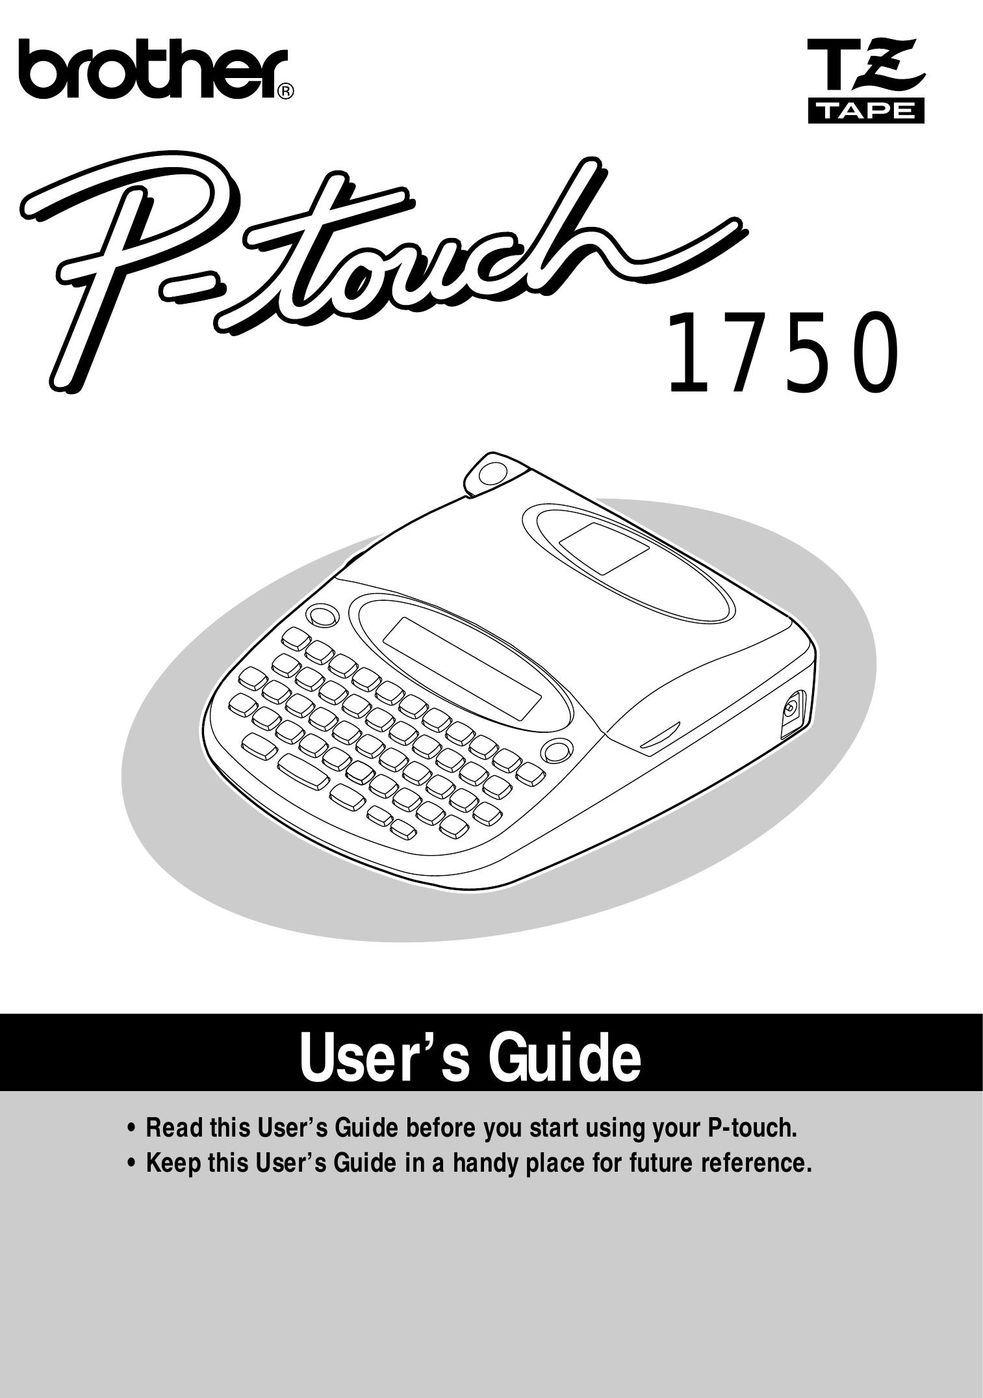 Brother PT-1750 Telephone User Manual